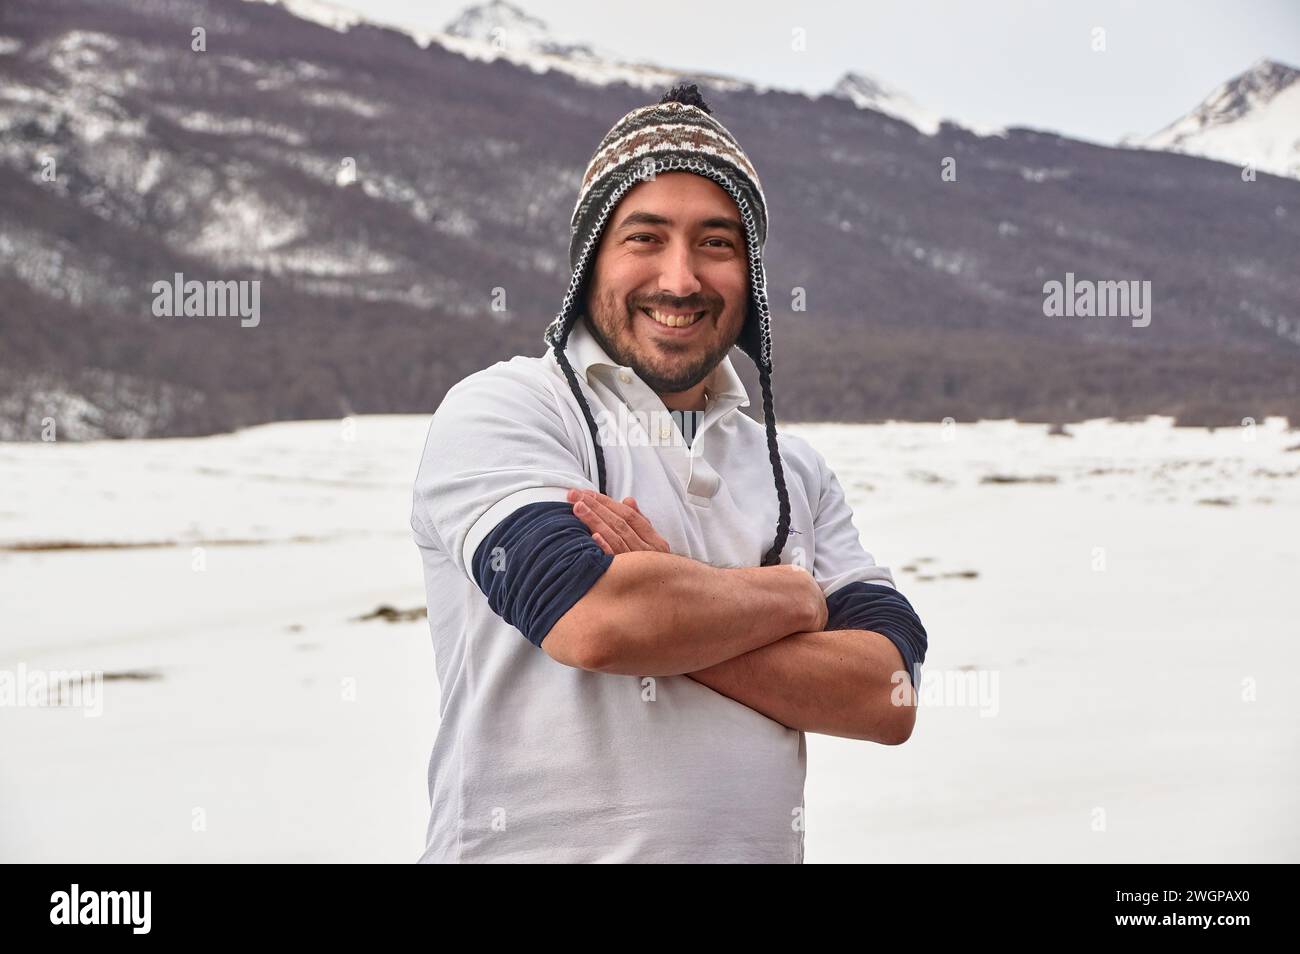 Unsheltered man in cold and snowy environment. Stock Photo